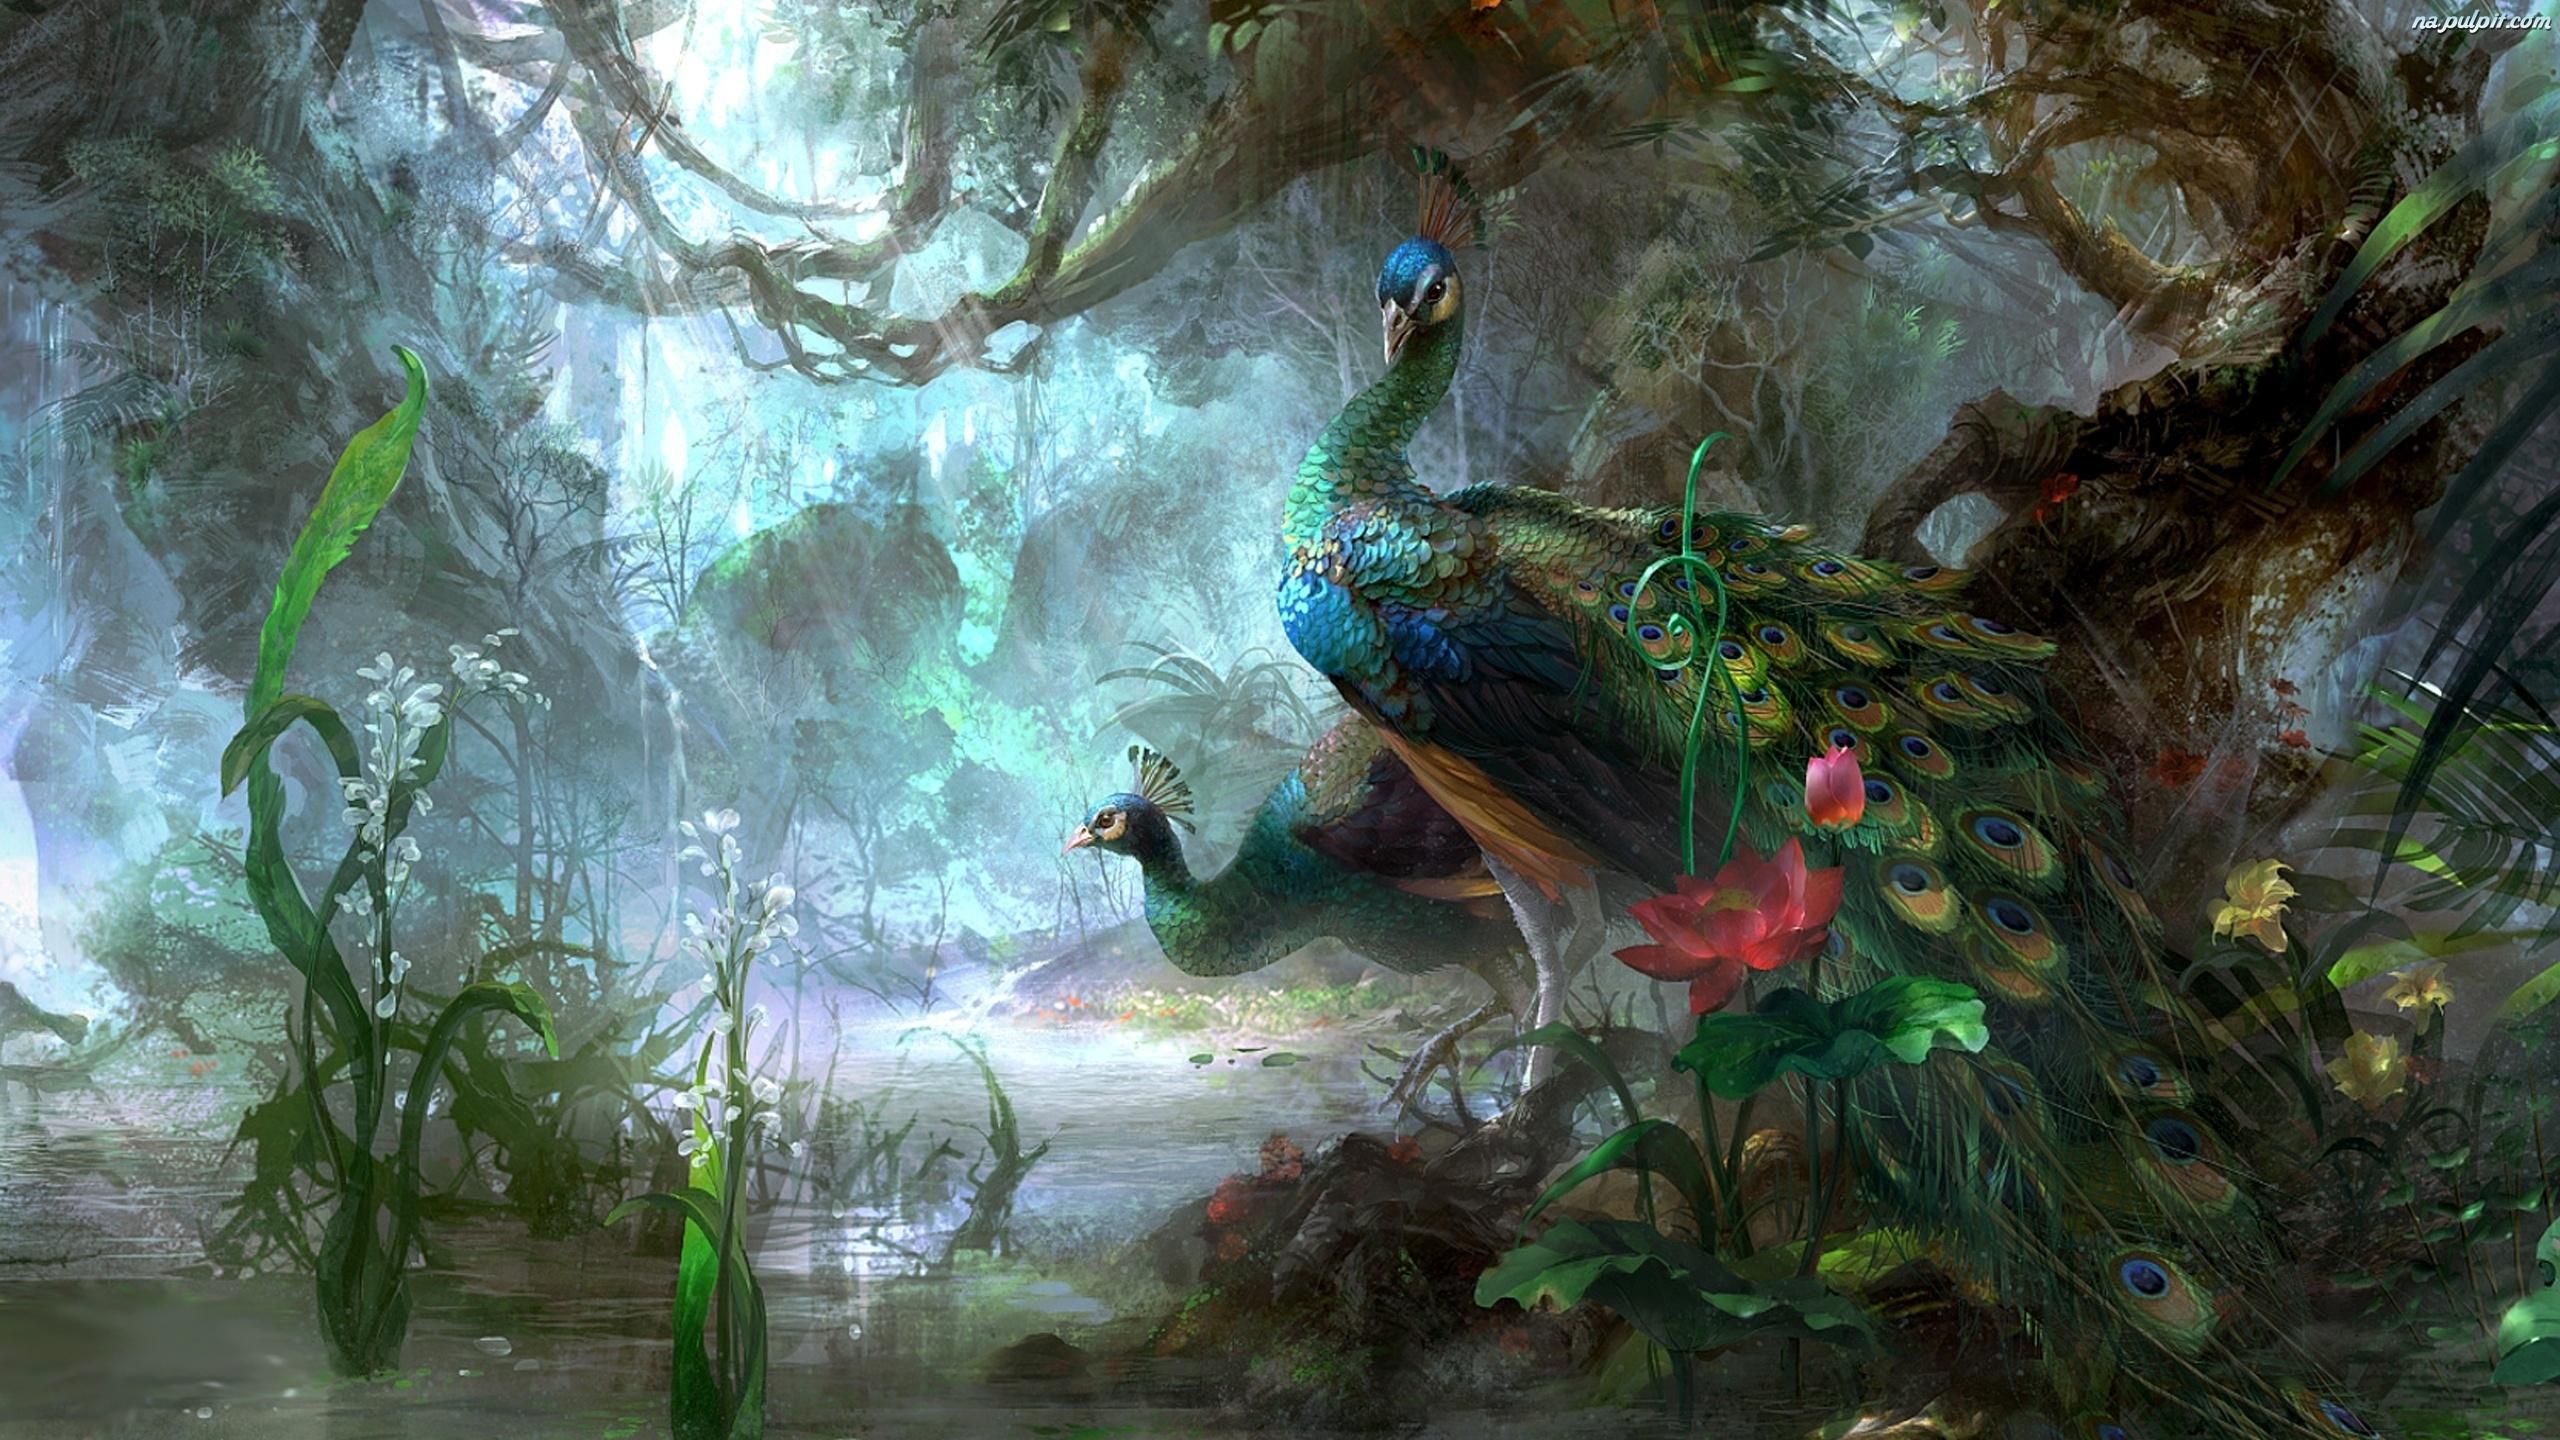 Peacock In Jungle Painting - HD Wallpaper 